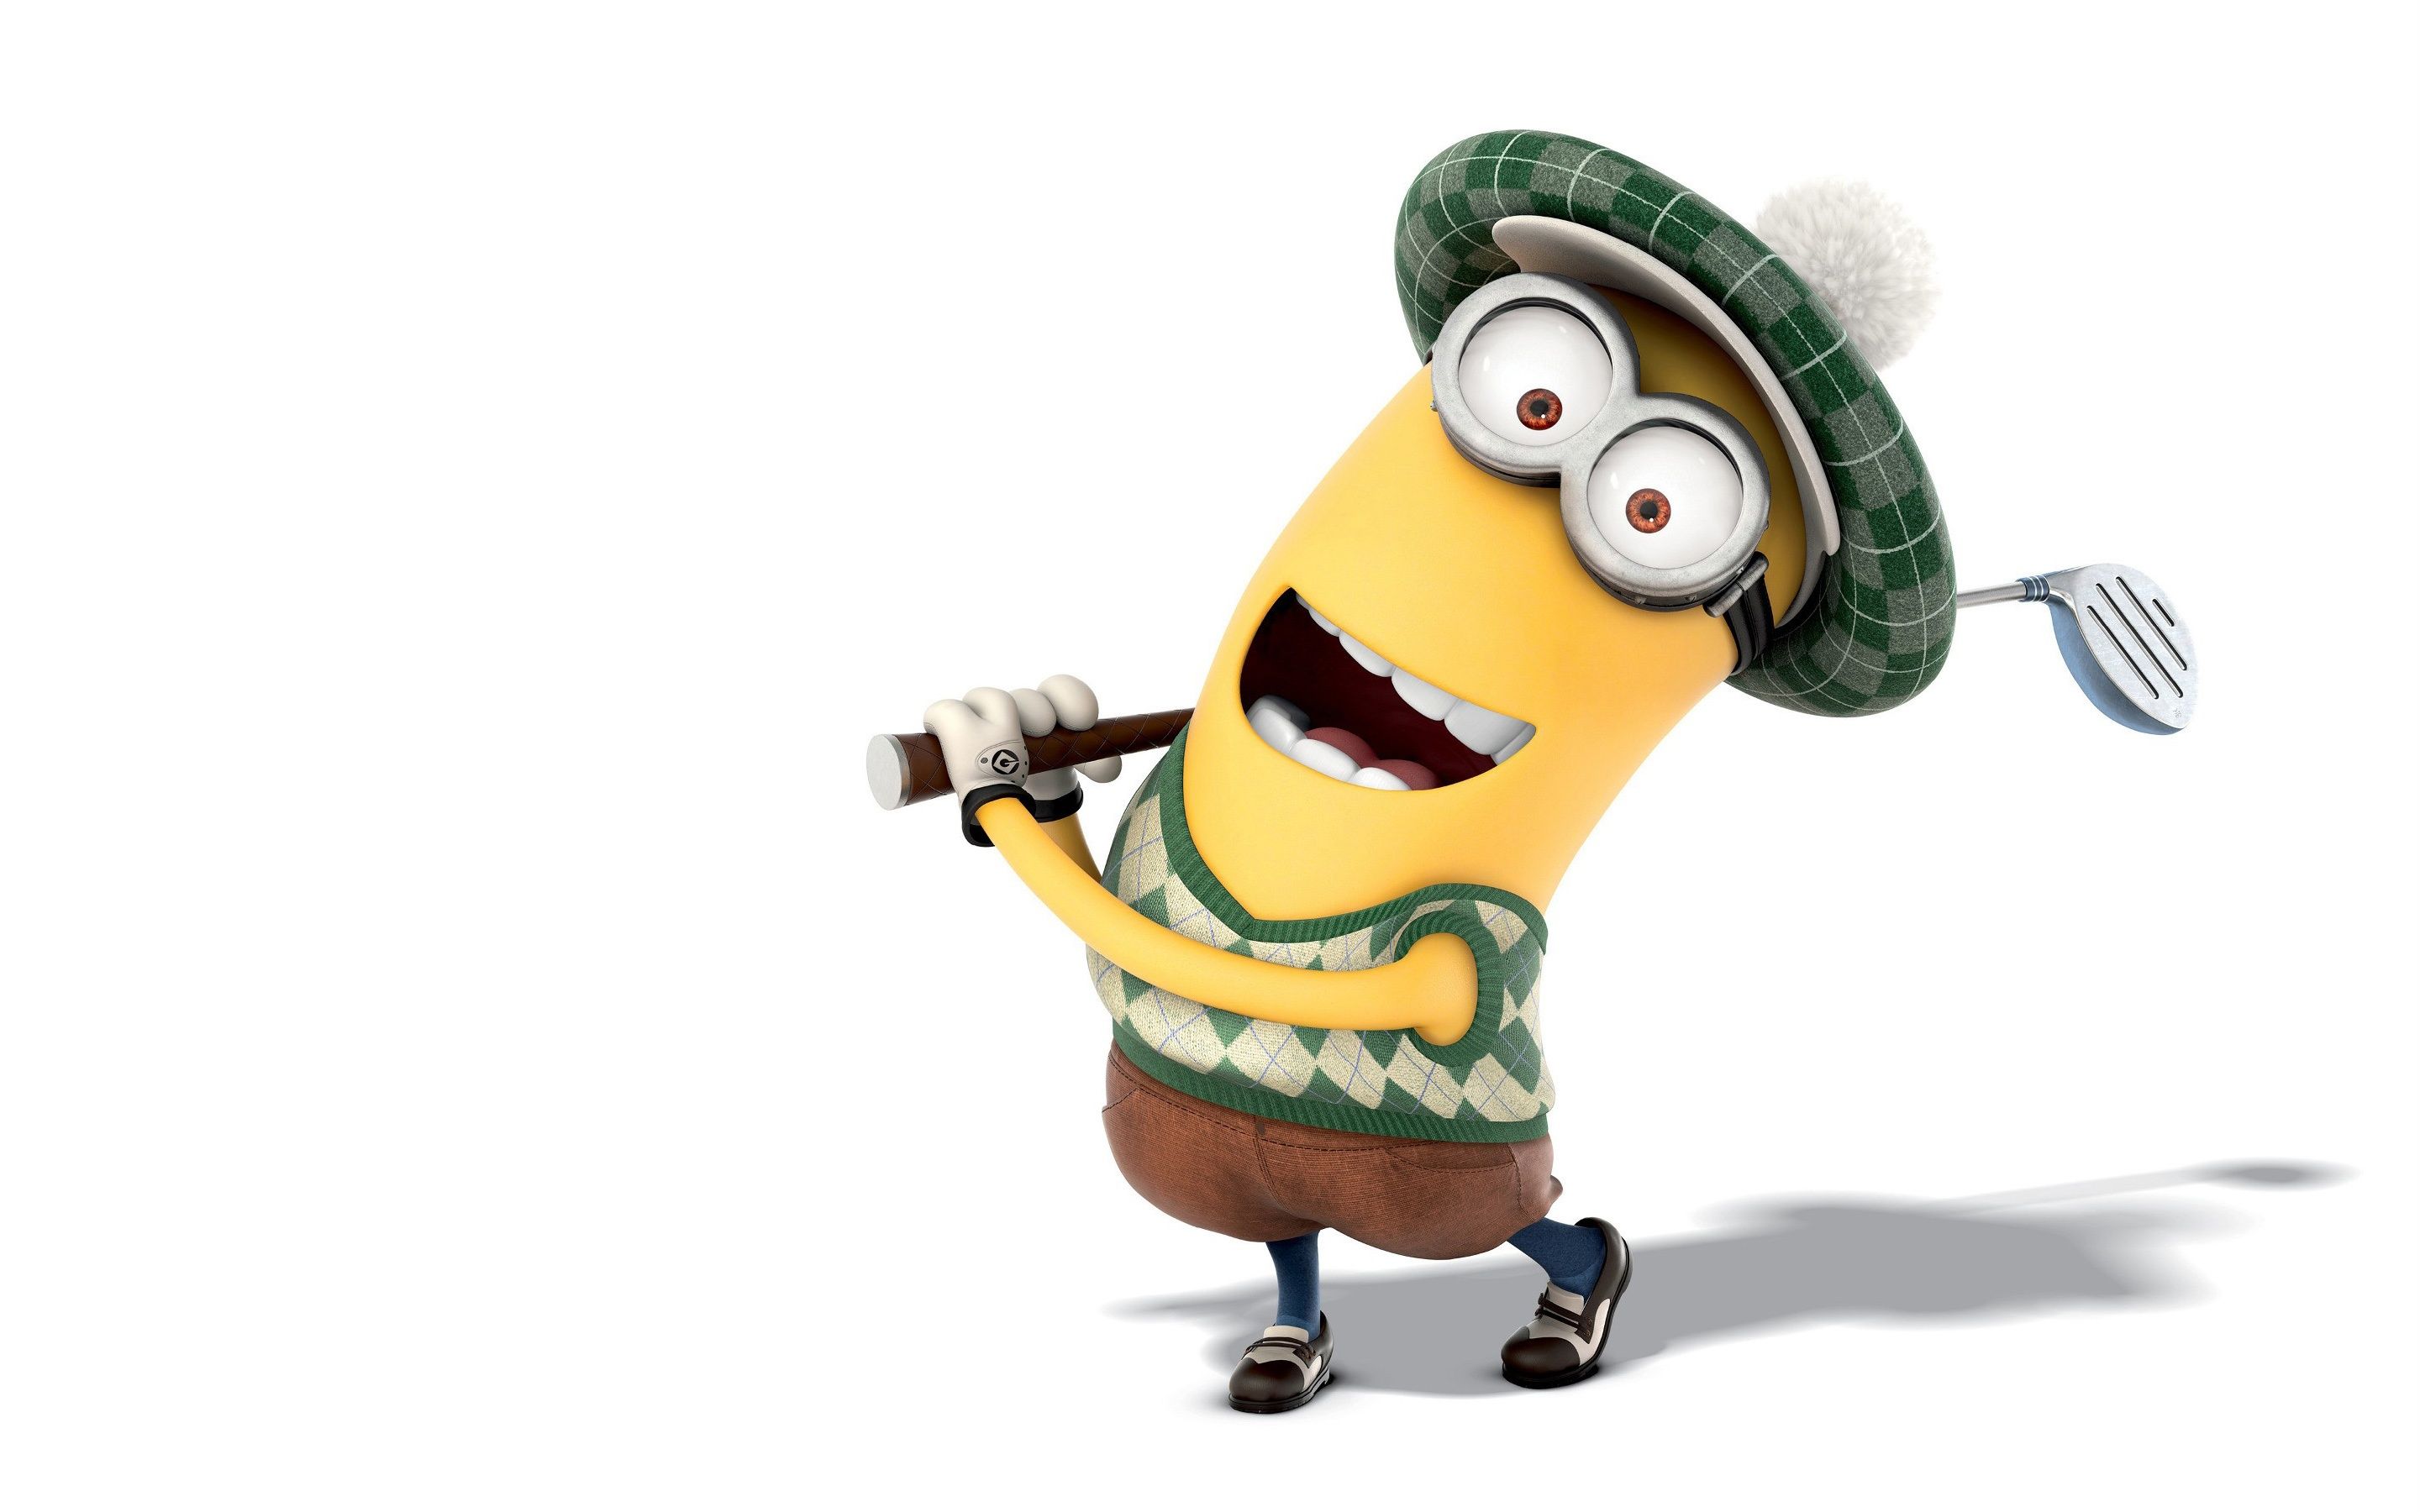 Minion Kevin in Despicable Me 2 HD Wallpaper - iHD Wallpapers